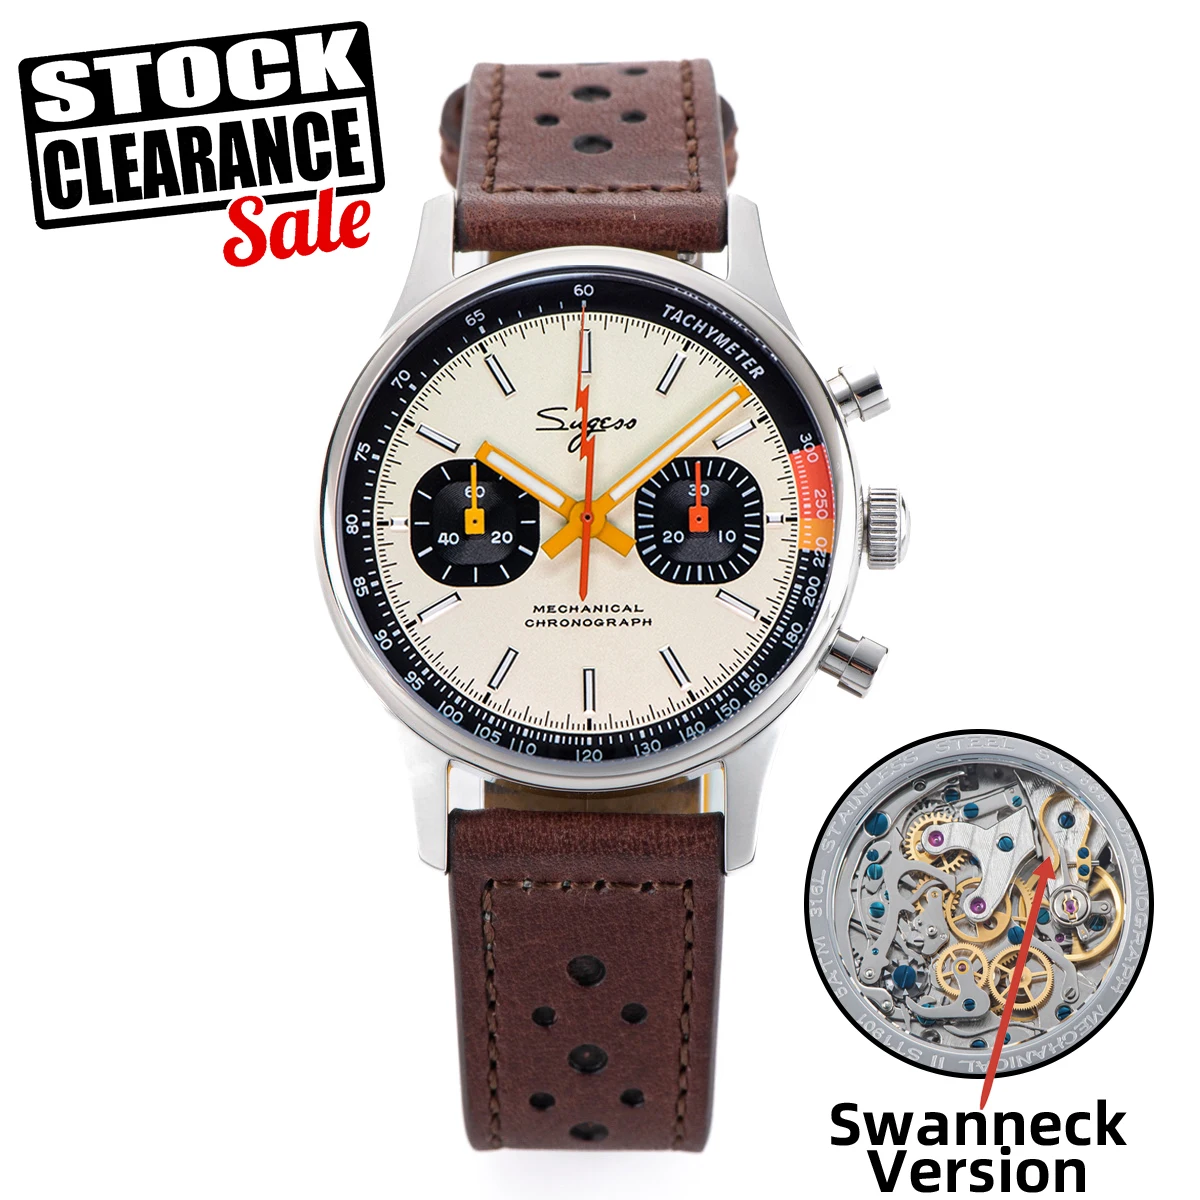 Sugess Watch of Men Chronograph Mechanical Wristwatches with Seagull ST19 Swanneck Movement Pilot Sapphire Crystal Racing V2 New